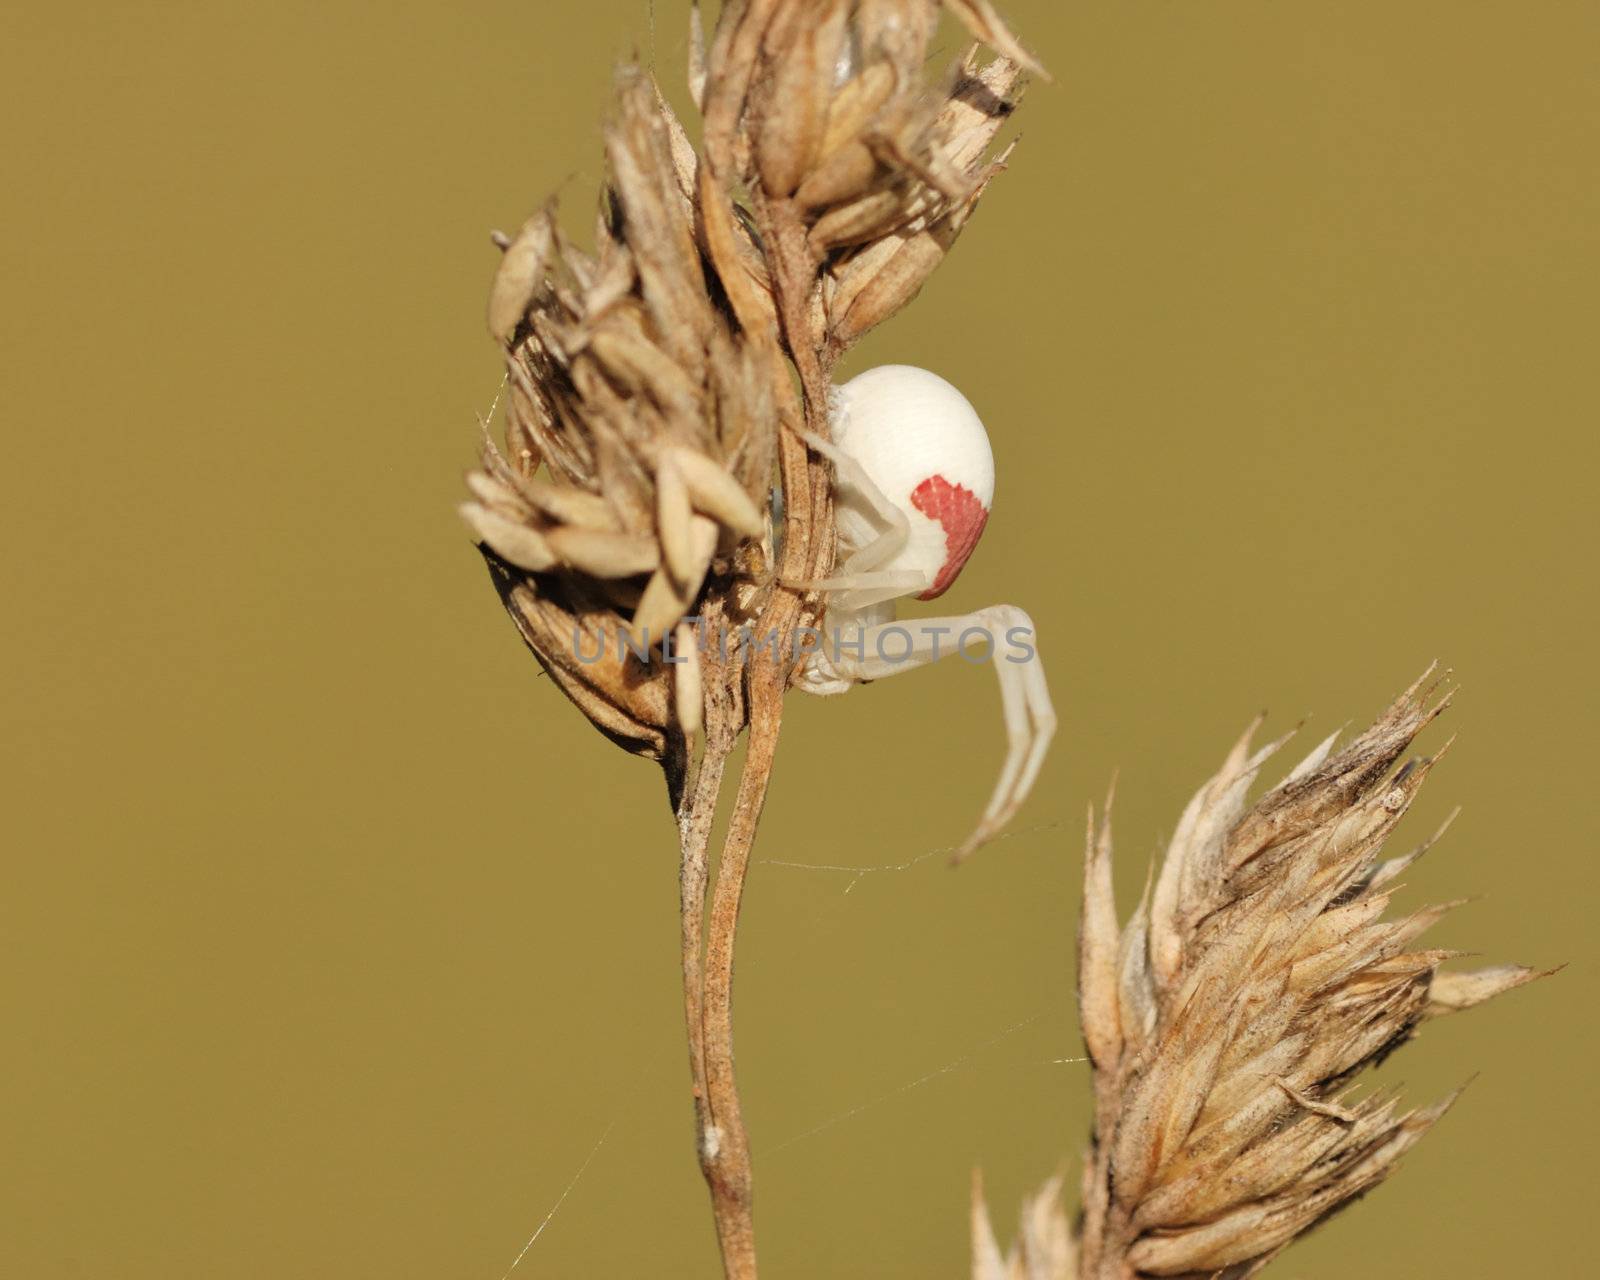 Goldenrod Spider perched on top of a grass stem with seeds.